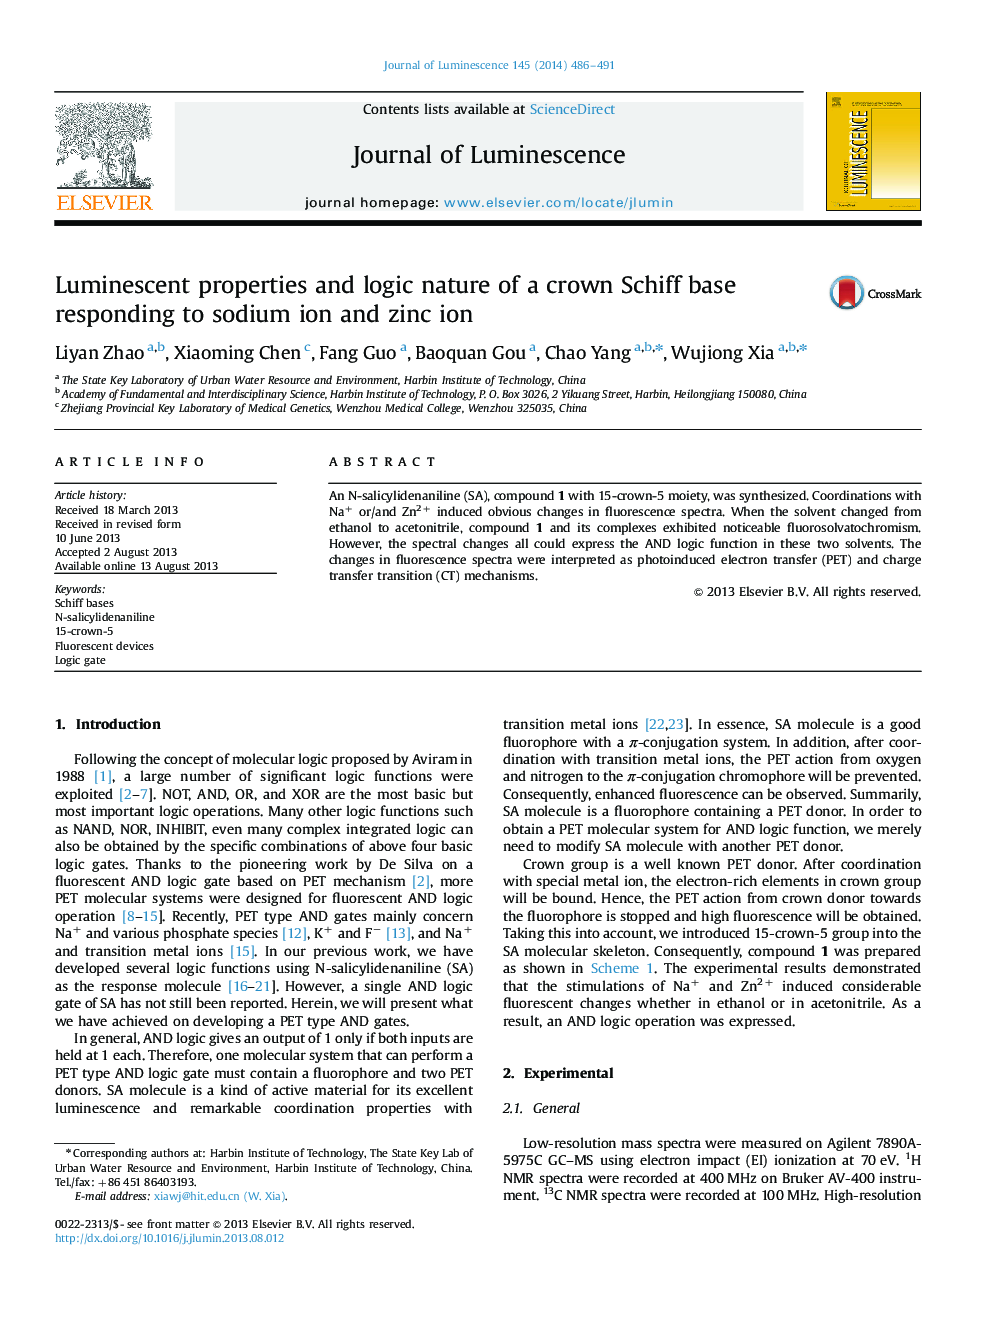 Luminescent properties and logic nature of a crown Schiff base responding to sodium ion and zinc ion